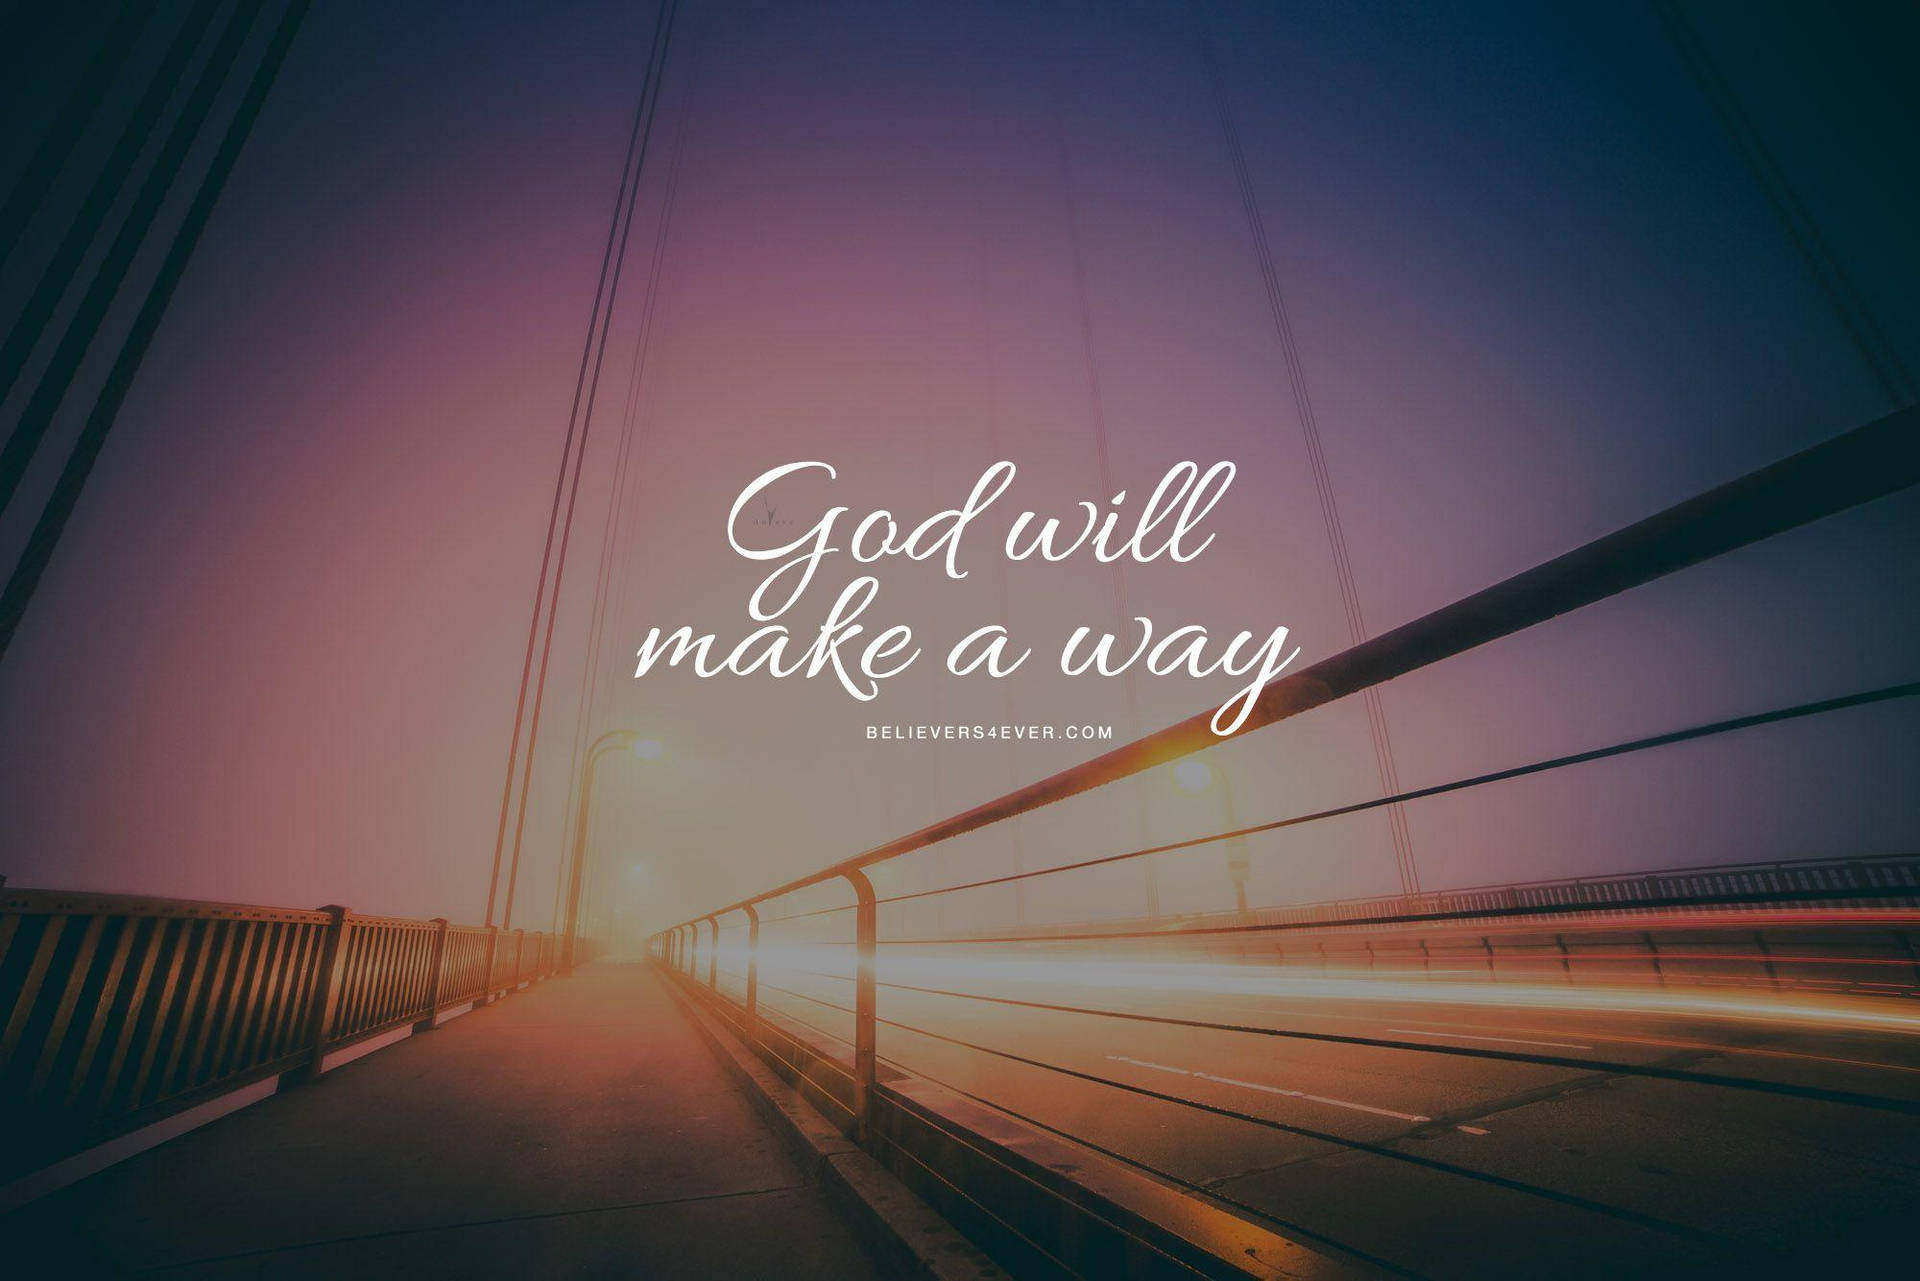 Quote Respecting Christian God With Bridge Backdrop Background